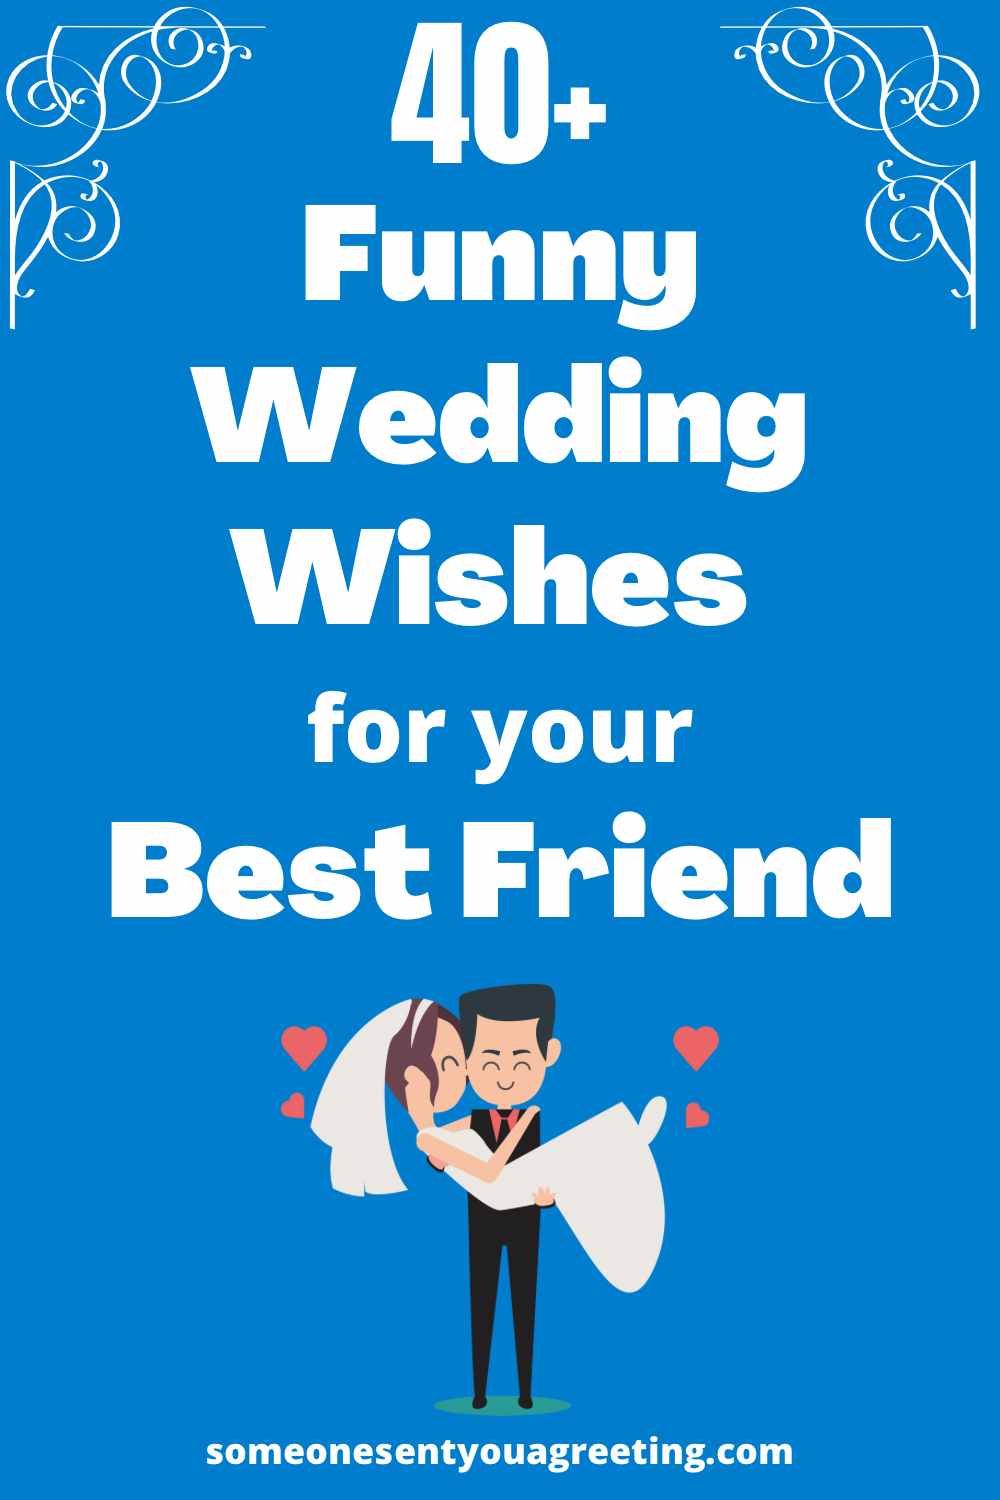 41+ Funny Wedding Wishes for your Best Friend Someone Sent You A Greeting